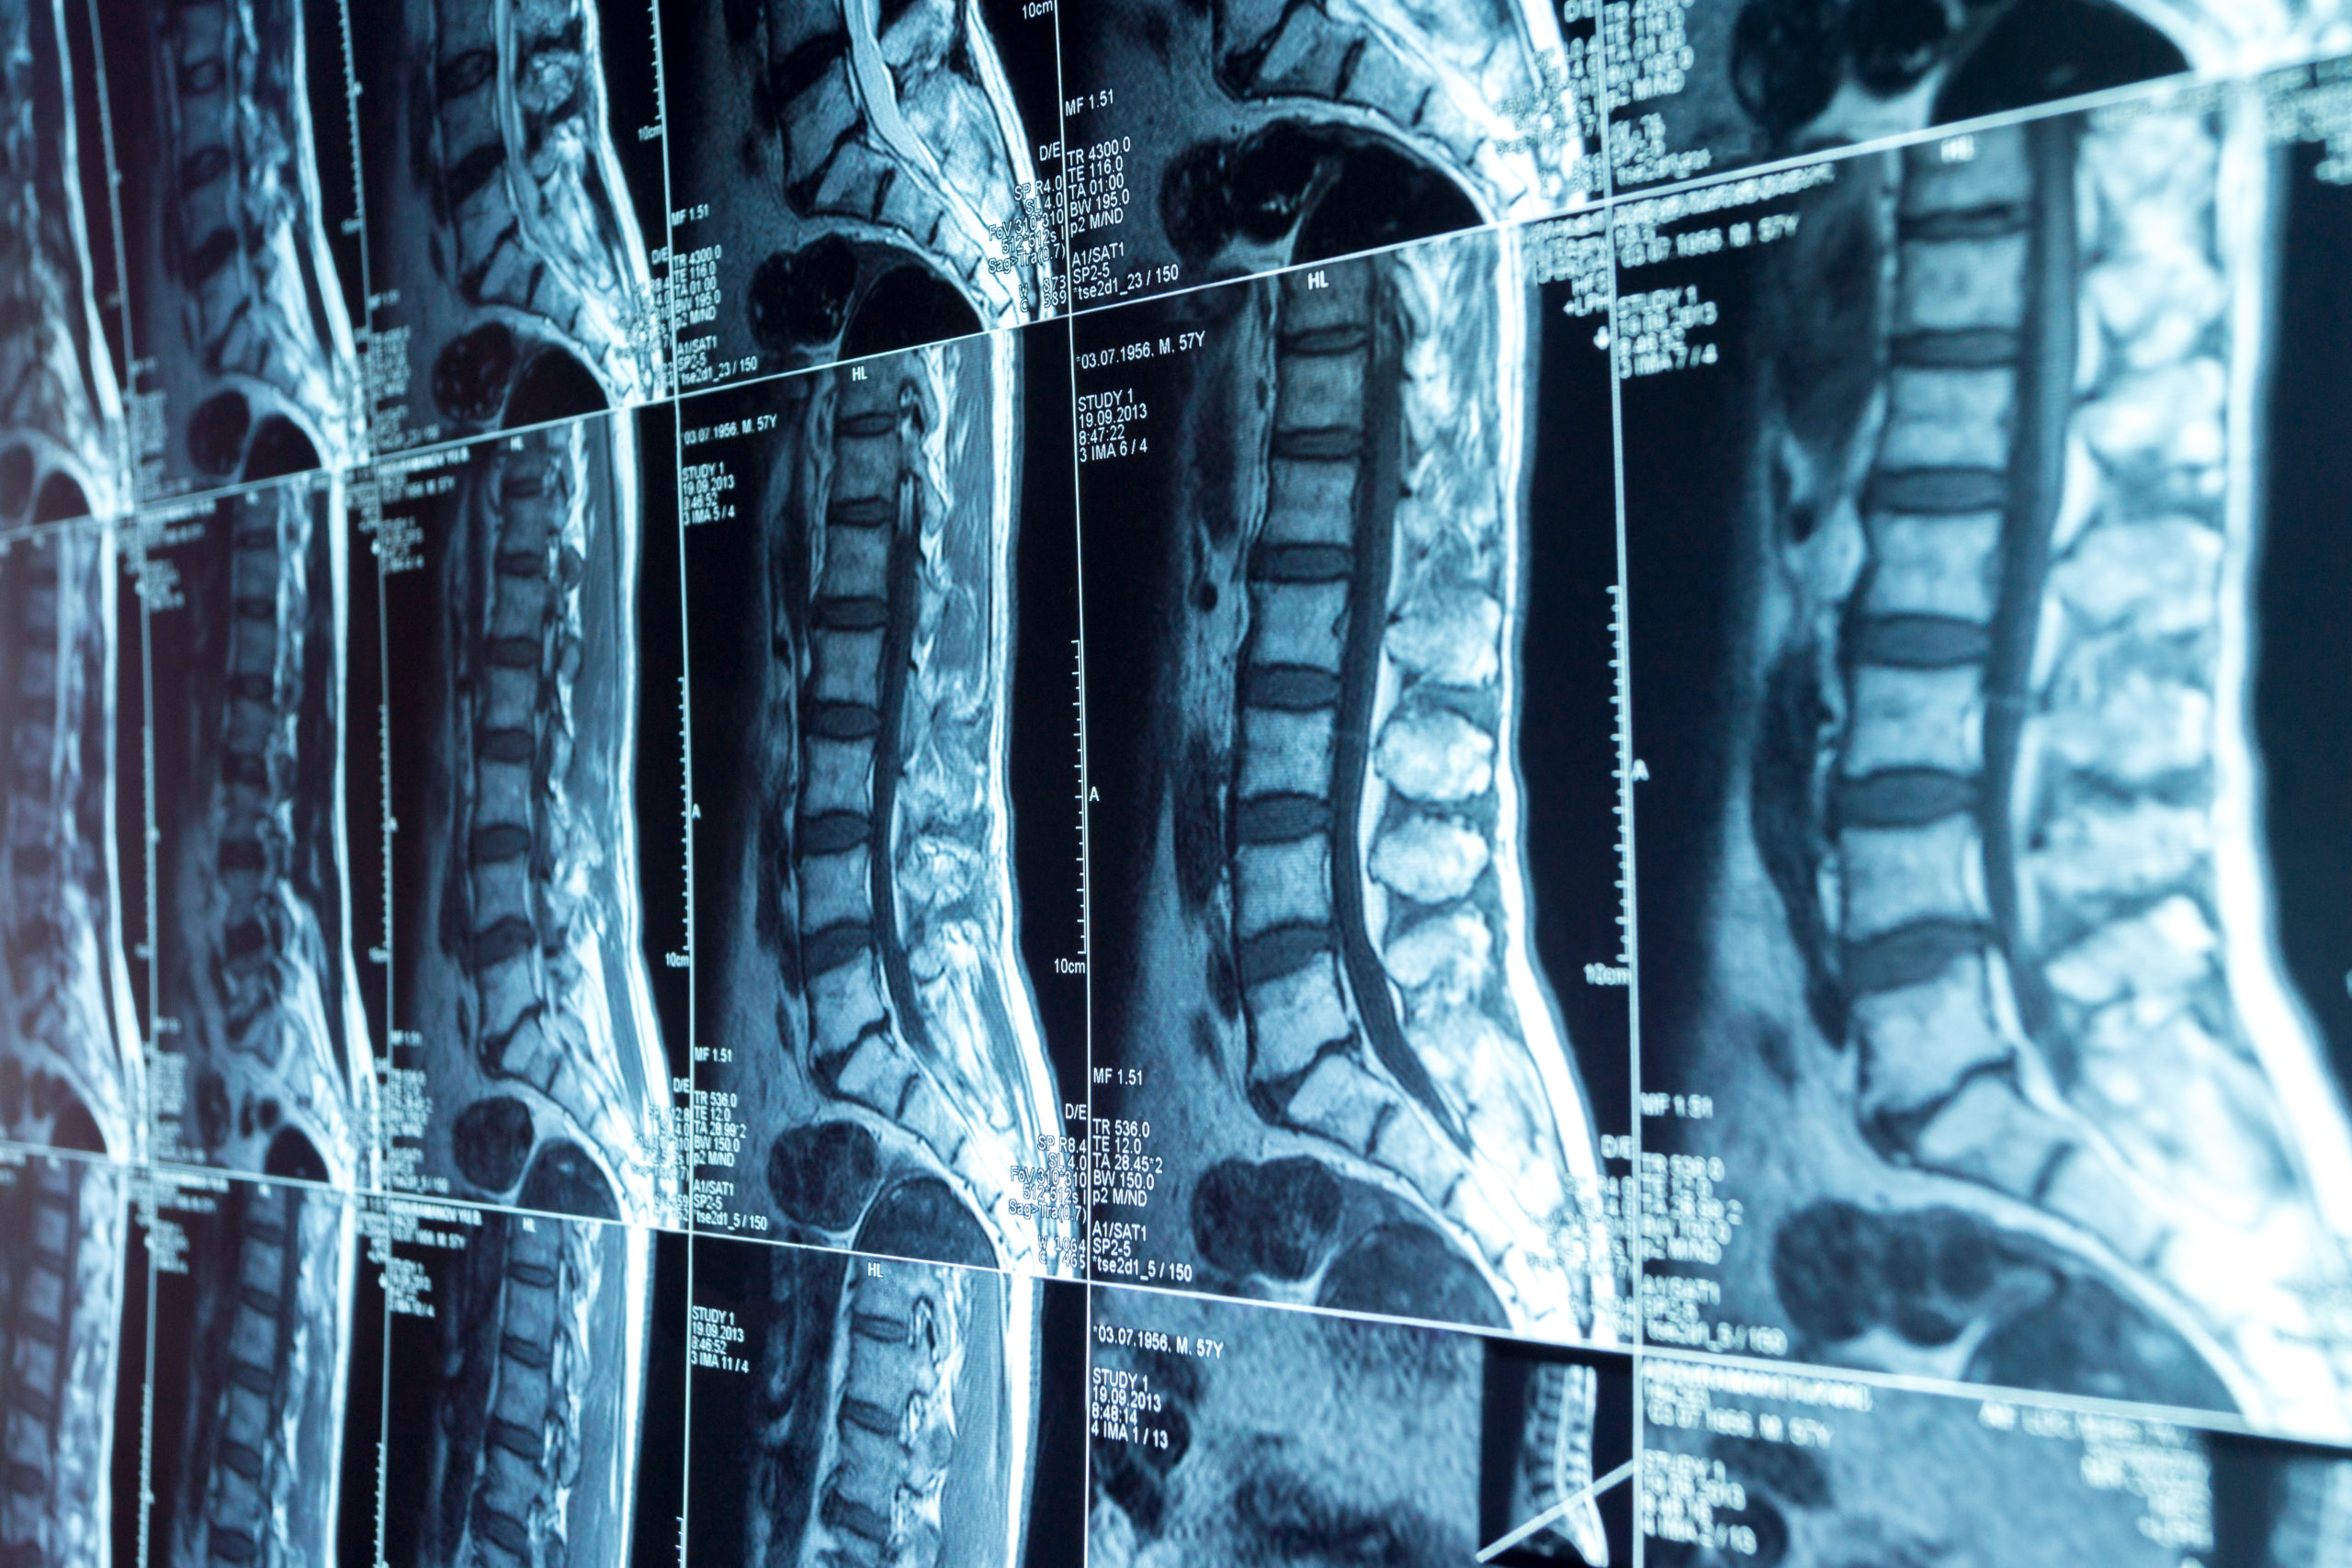 MRI scans of the lumbosacral spine